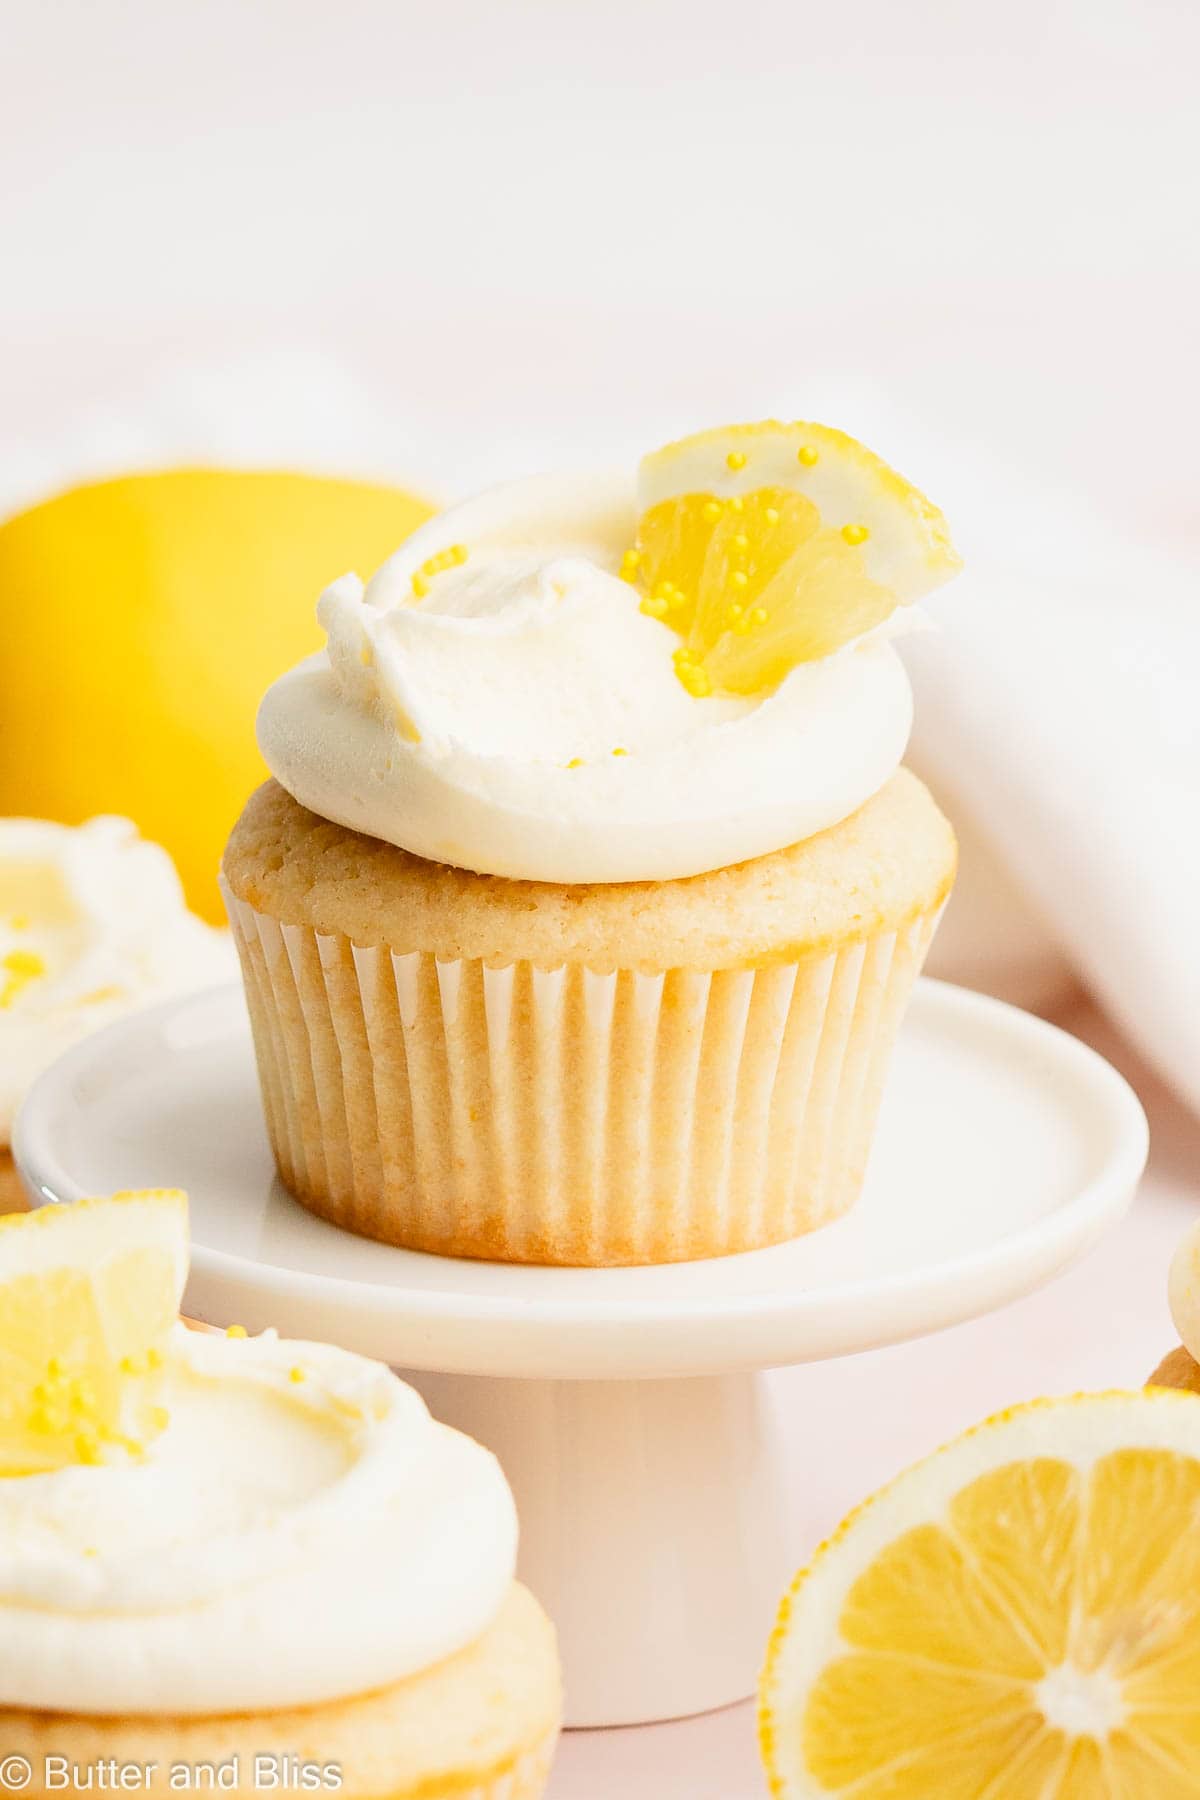 Pretty frosted lemon cupcake on a mini cupcake stand garnished with a lemon wedge.